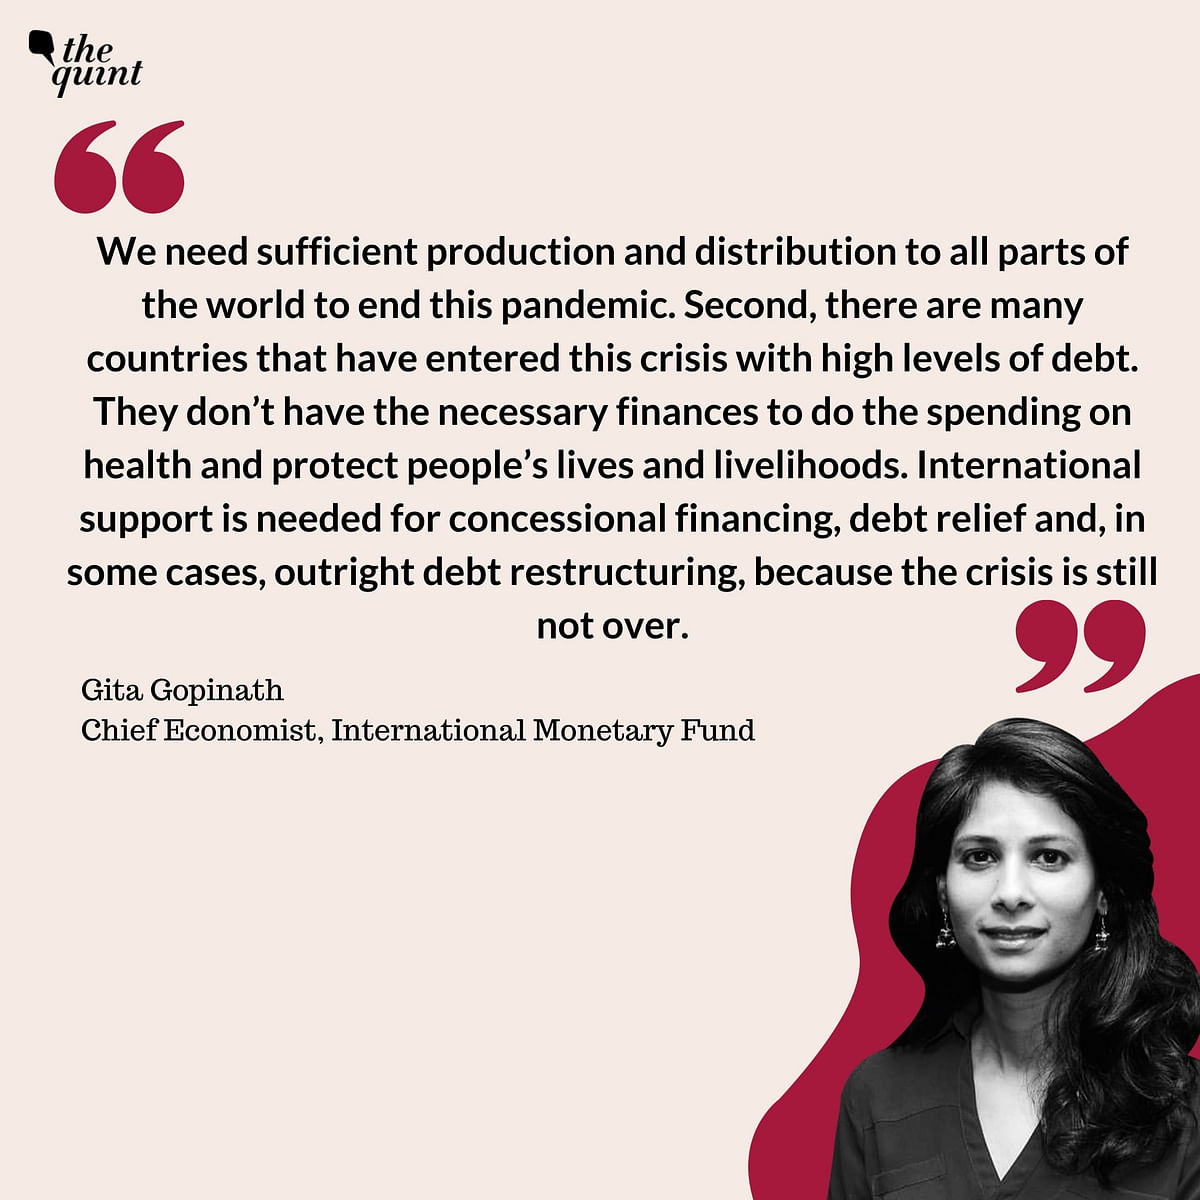 The Quint spoke to IMF’s Gita Gopinath after the projection of a 10.3% contraction in the Indian economy in 2020-21.